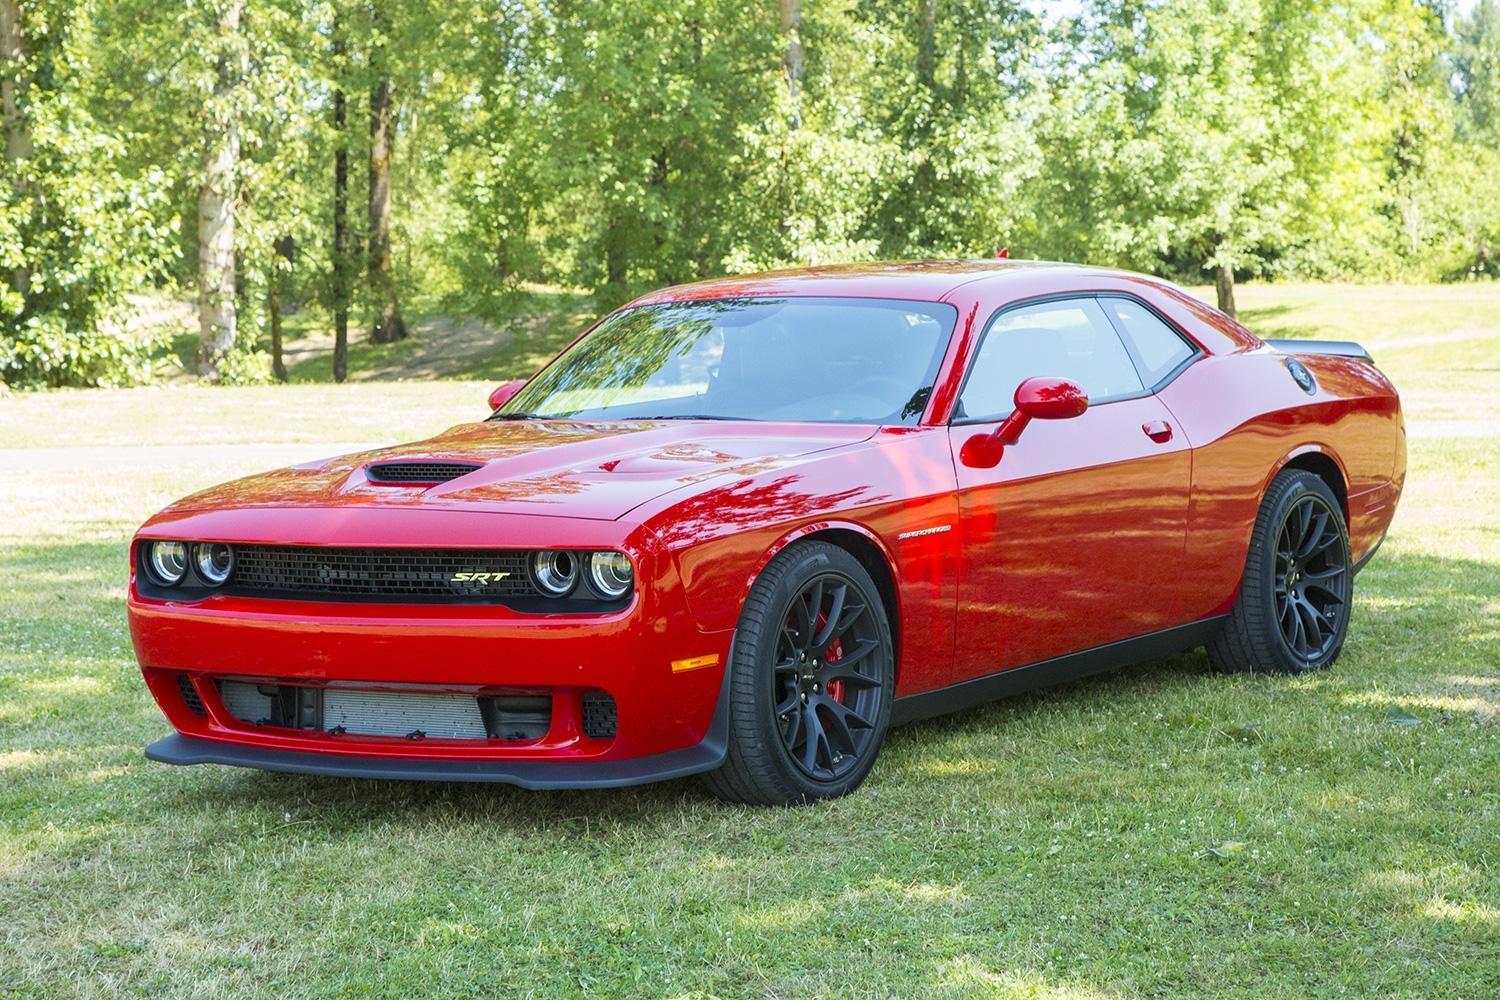 2015-dodge-challenger-hellcat-front-angle-1500x1000